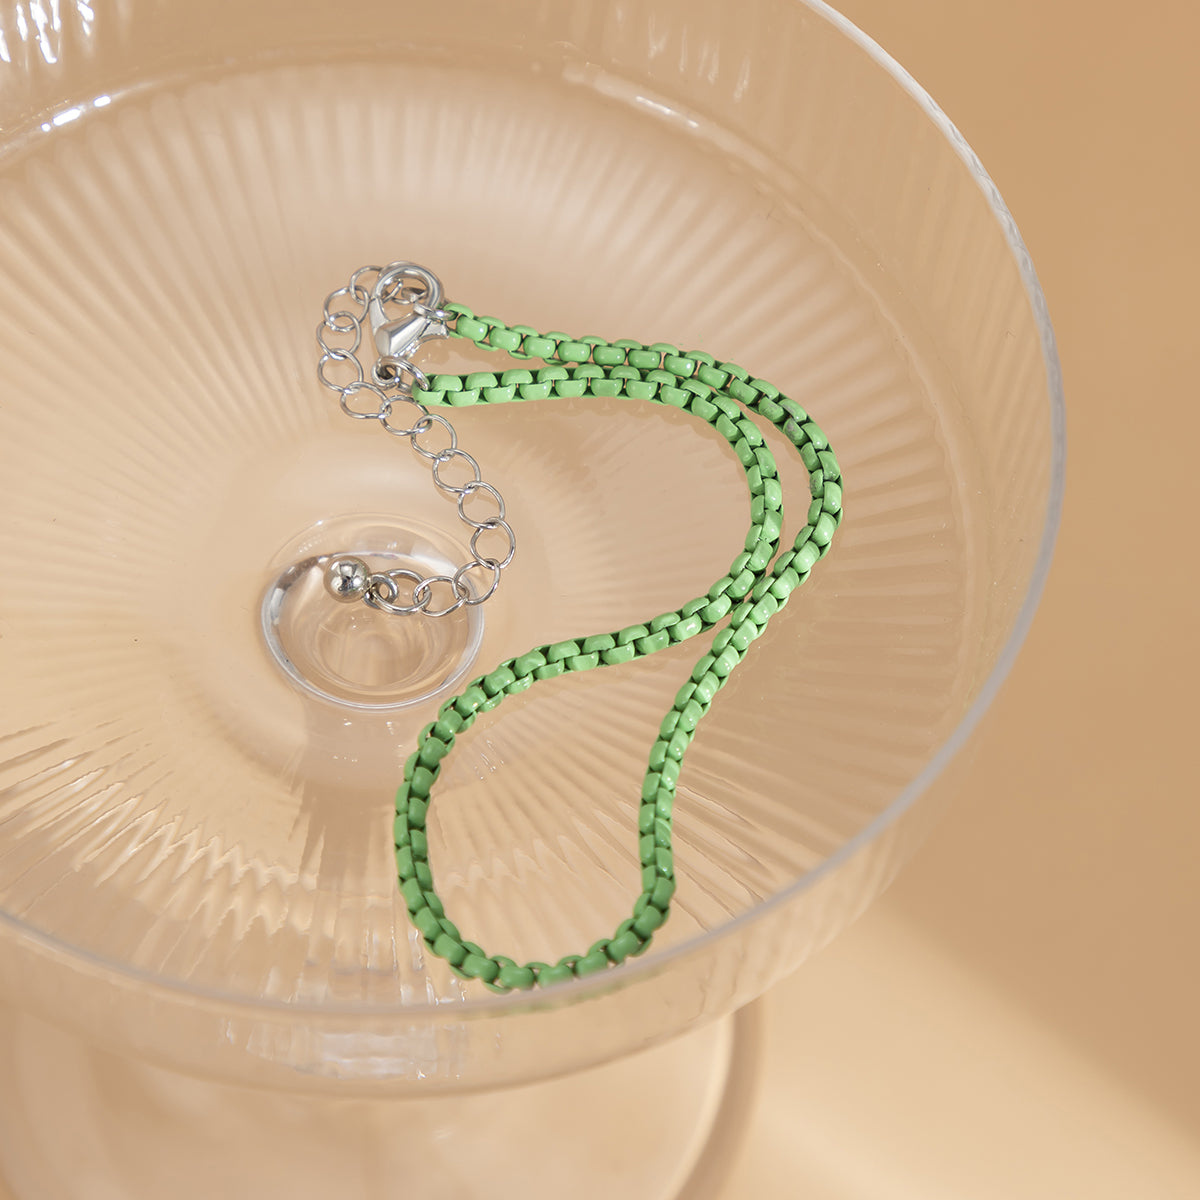 Green Enamel & Silver-Plated Box Chain Anklet